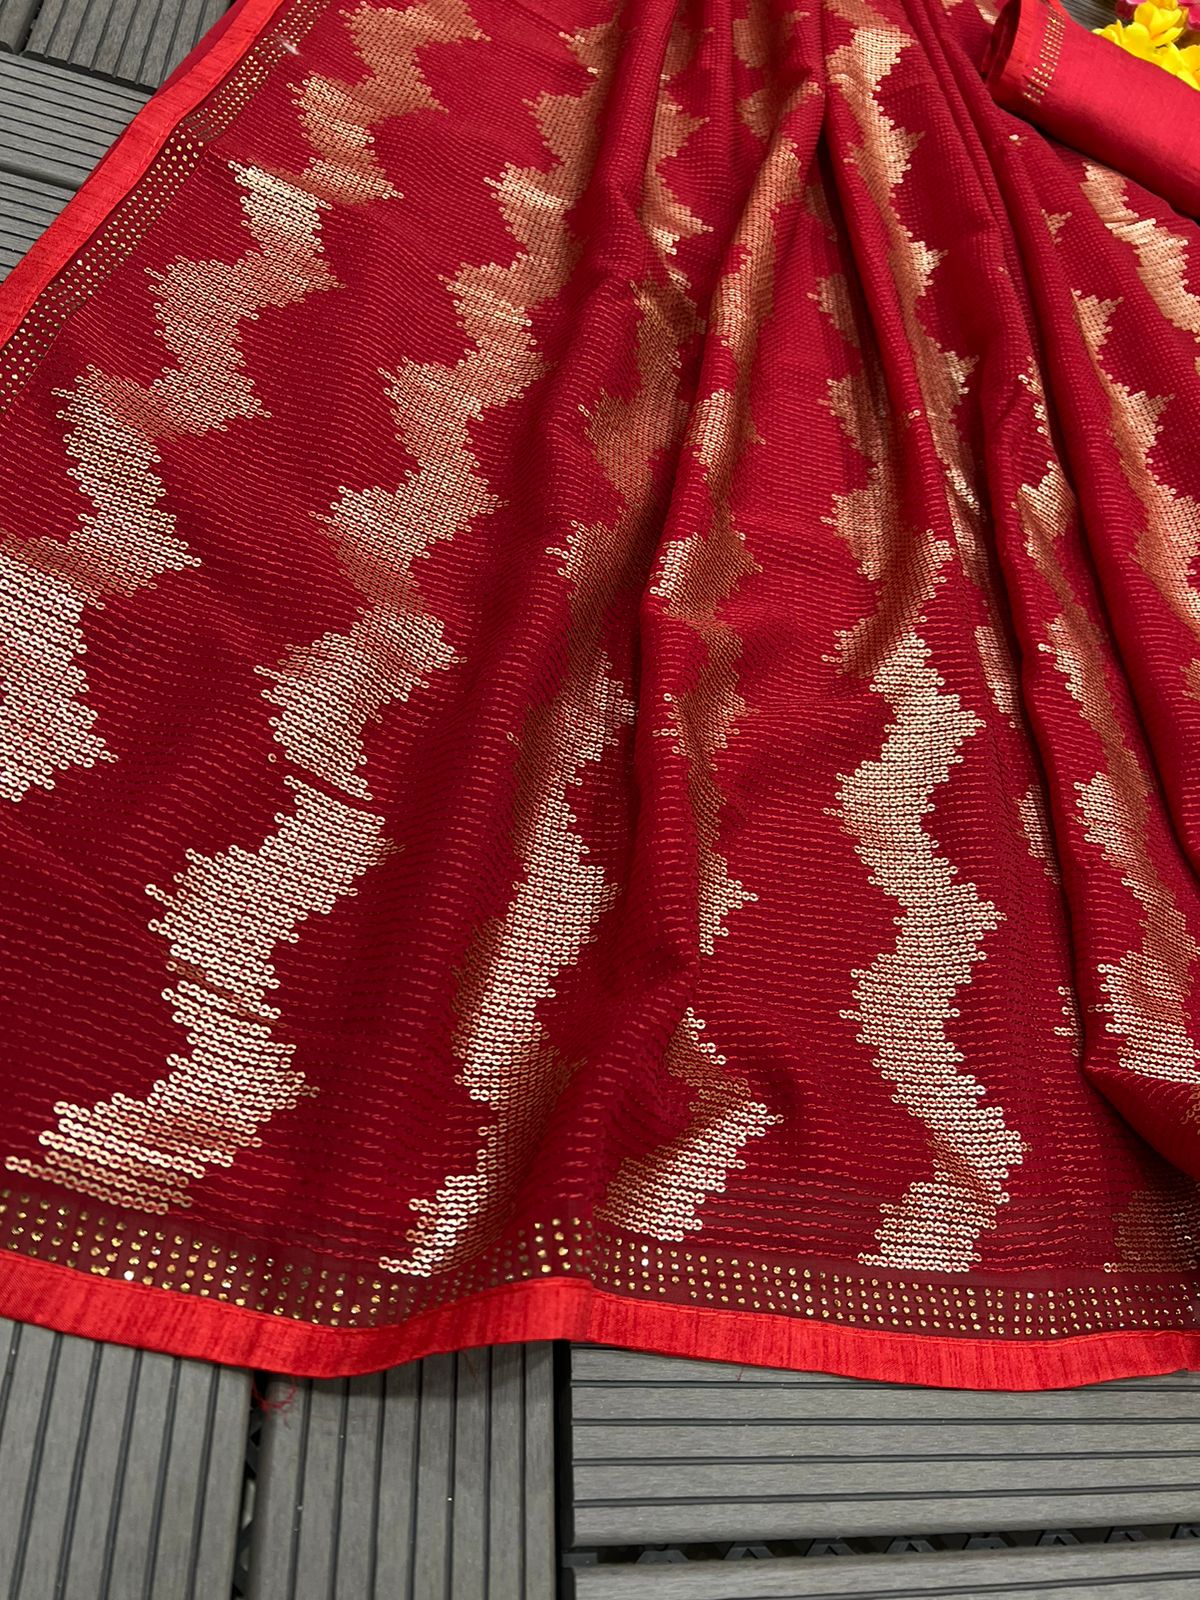 Occasion Wear Red Color Beautiful Work Saree